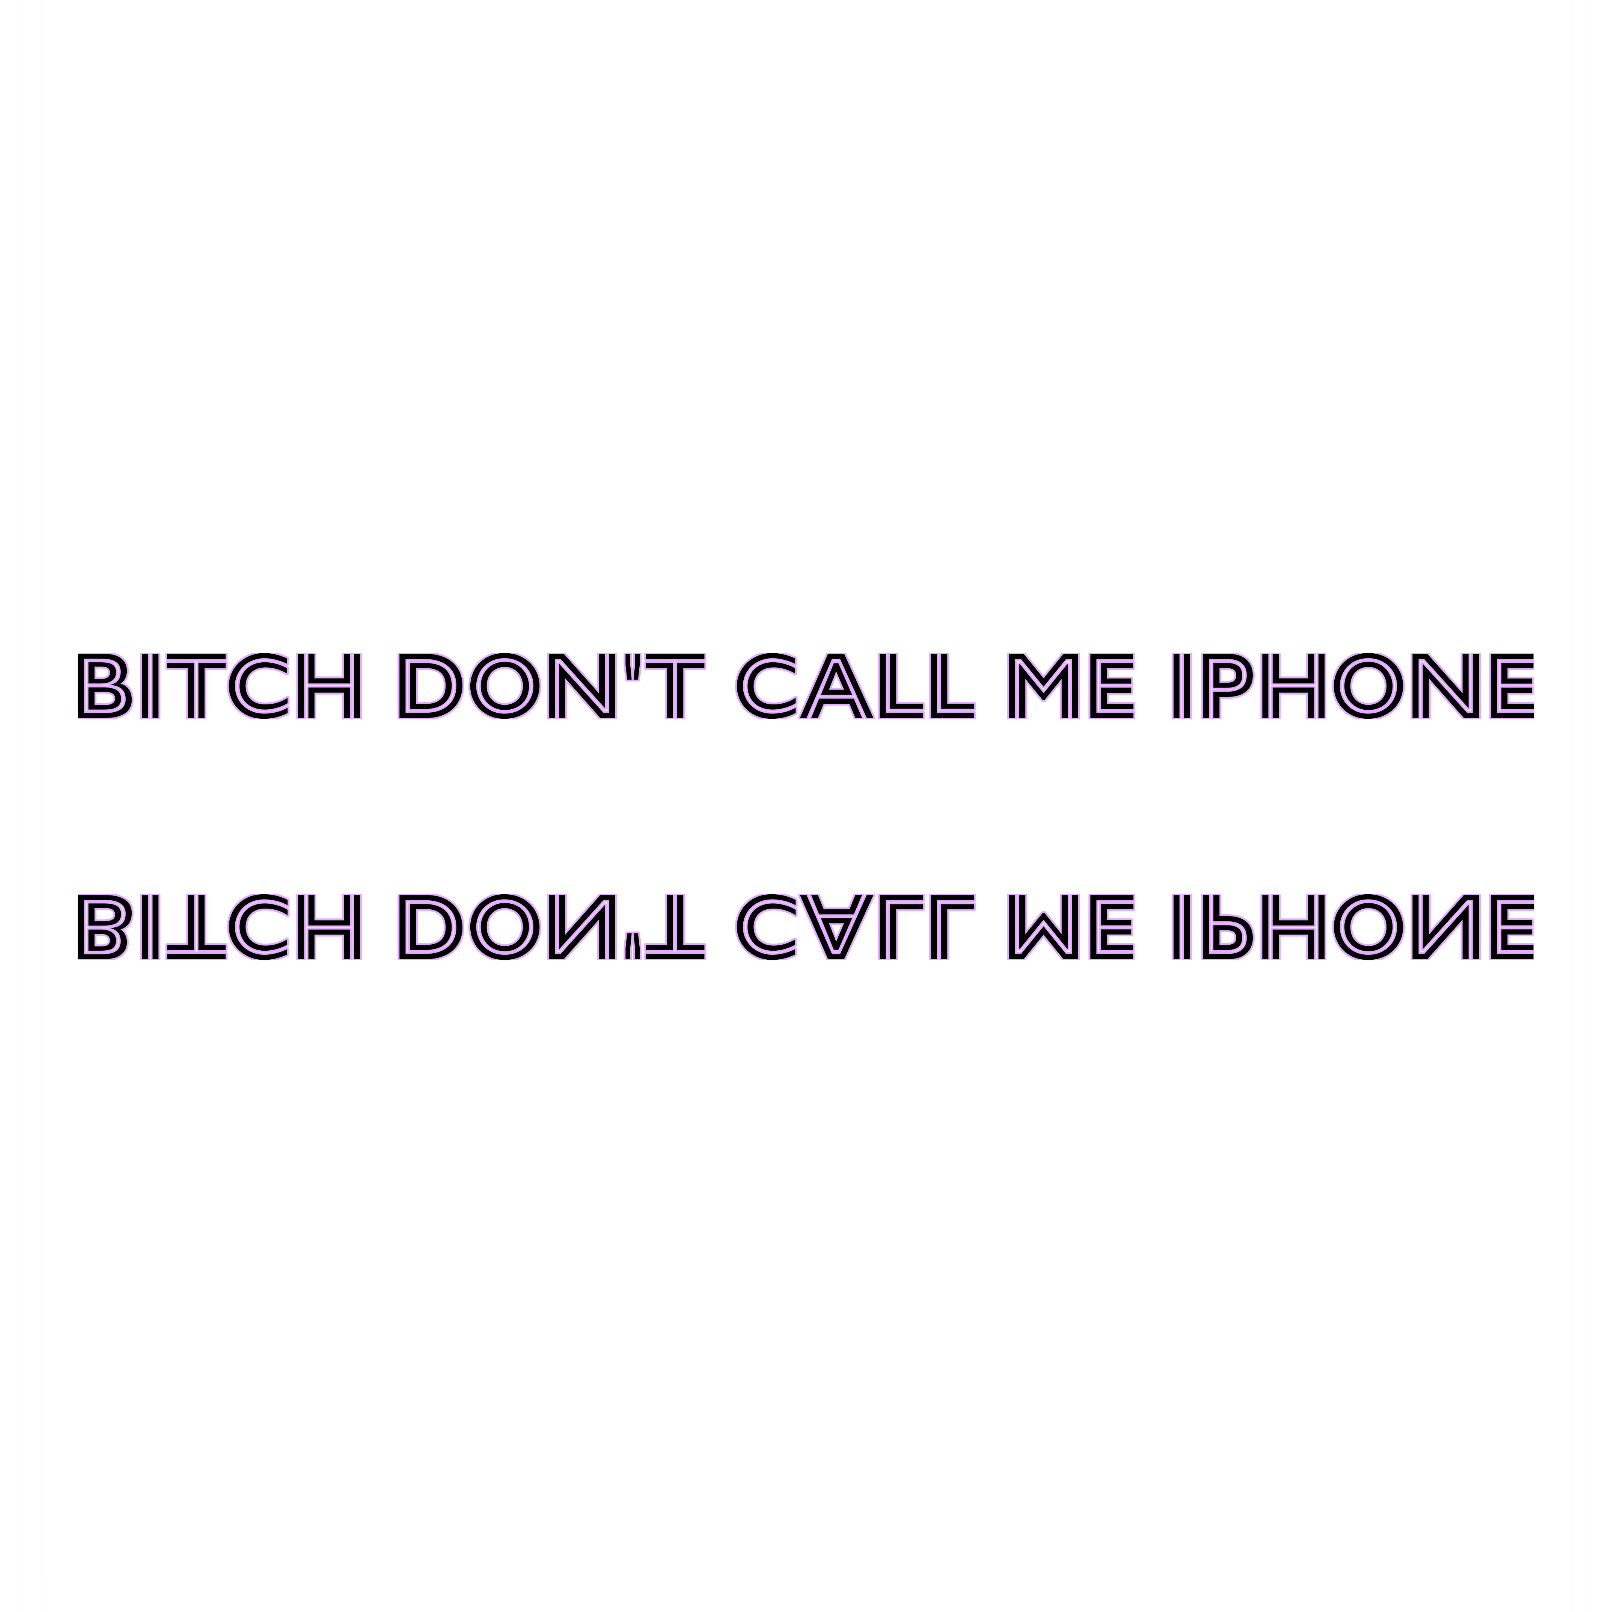 Don't Call Me IPHONE (remix)